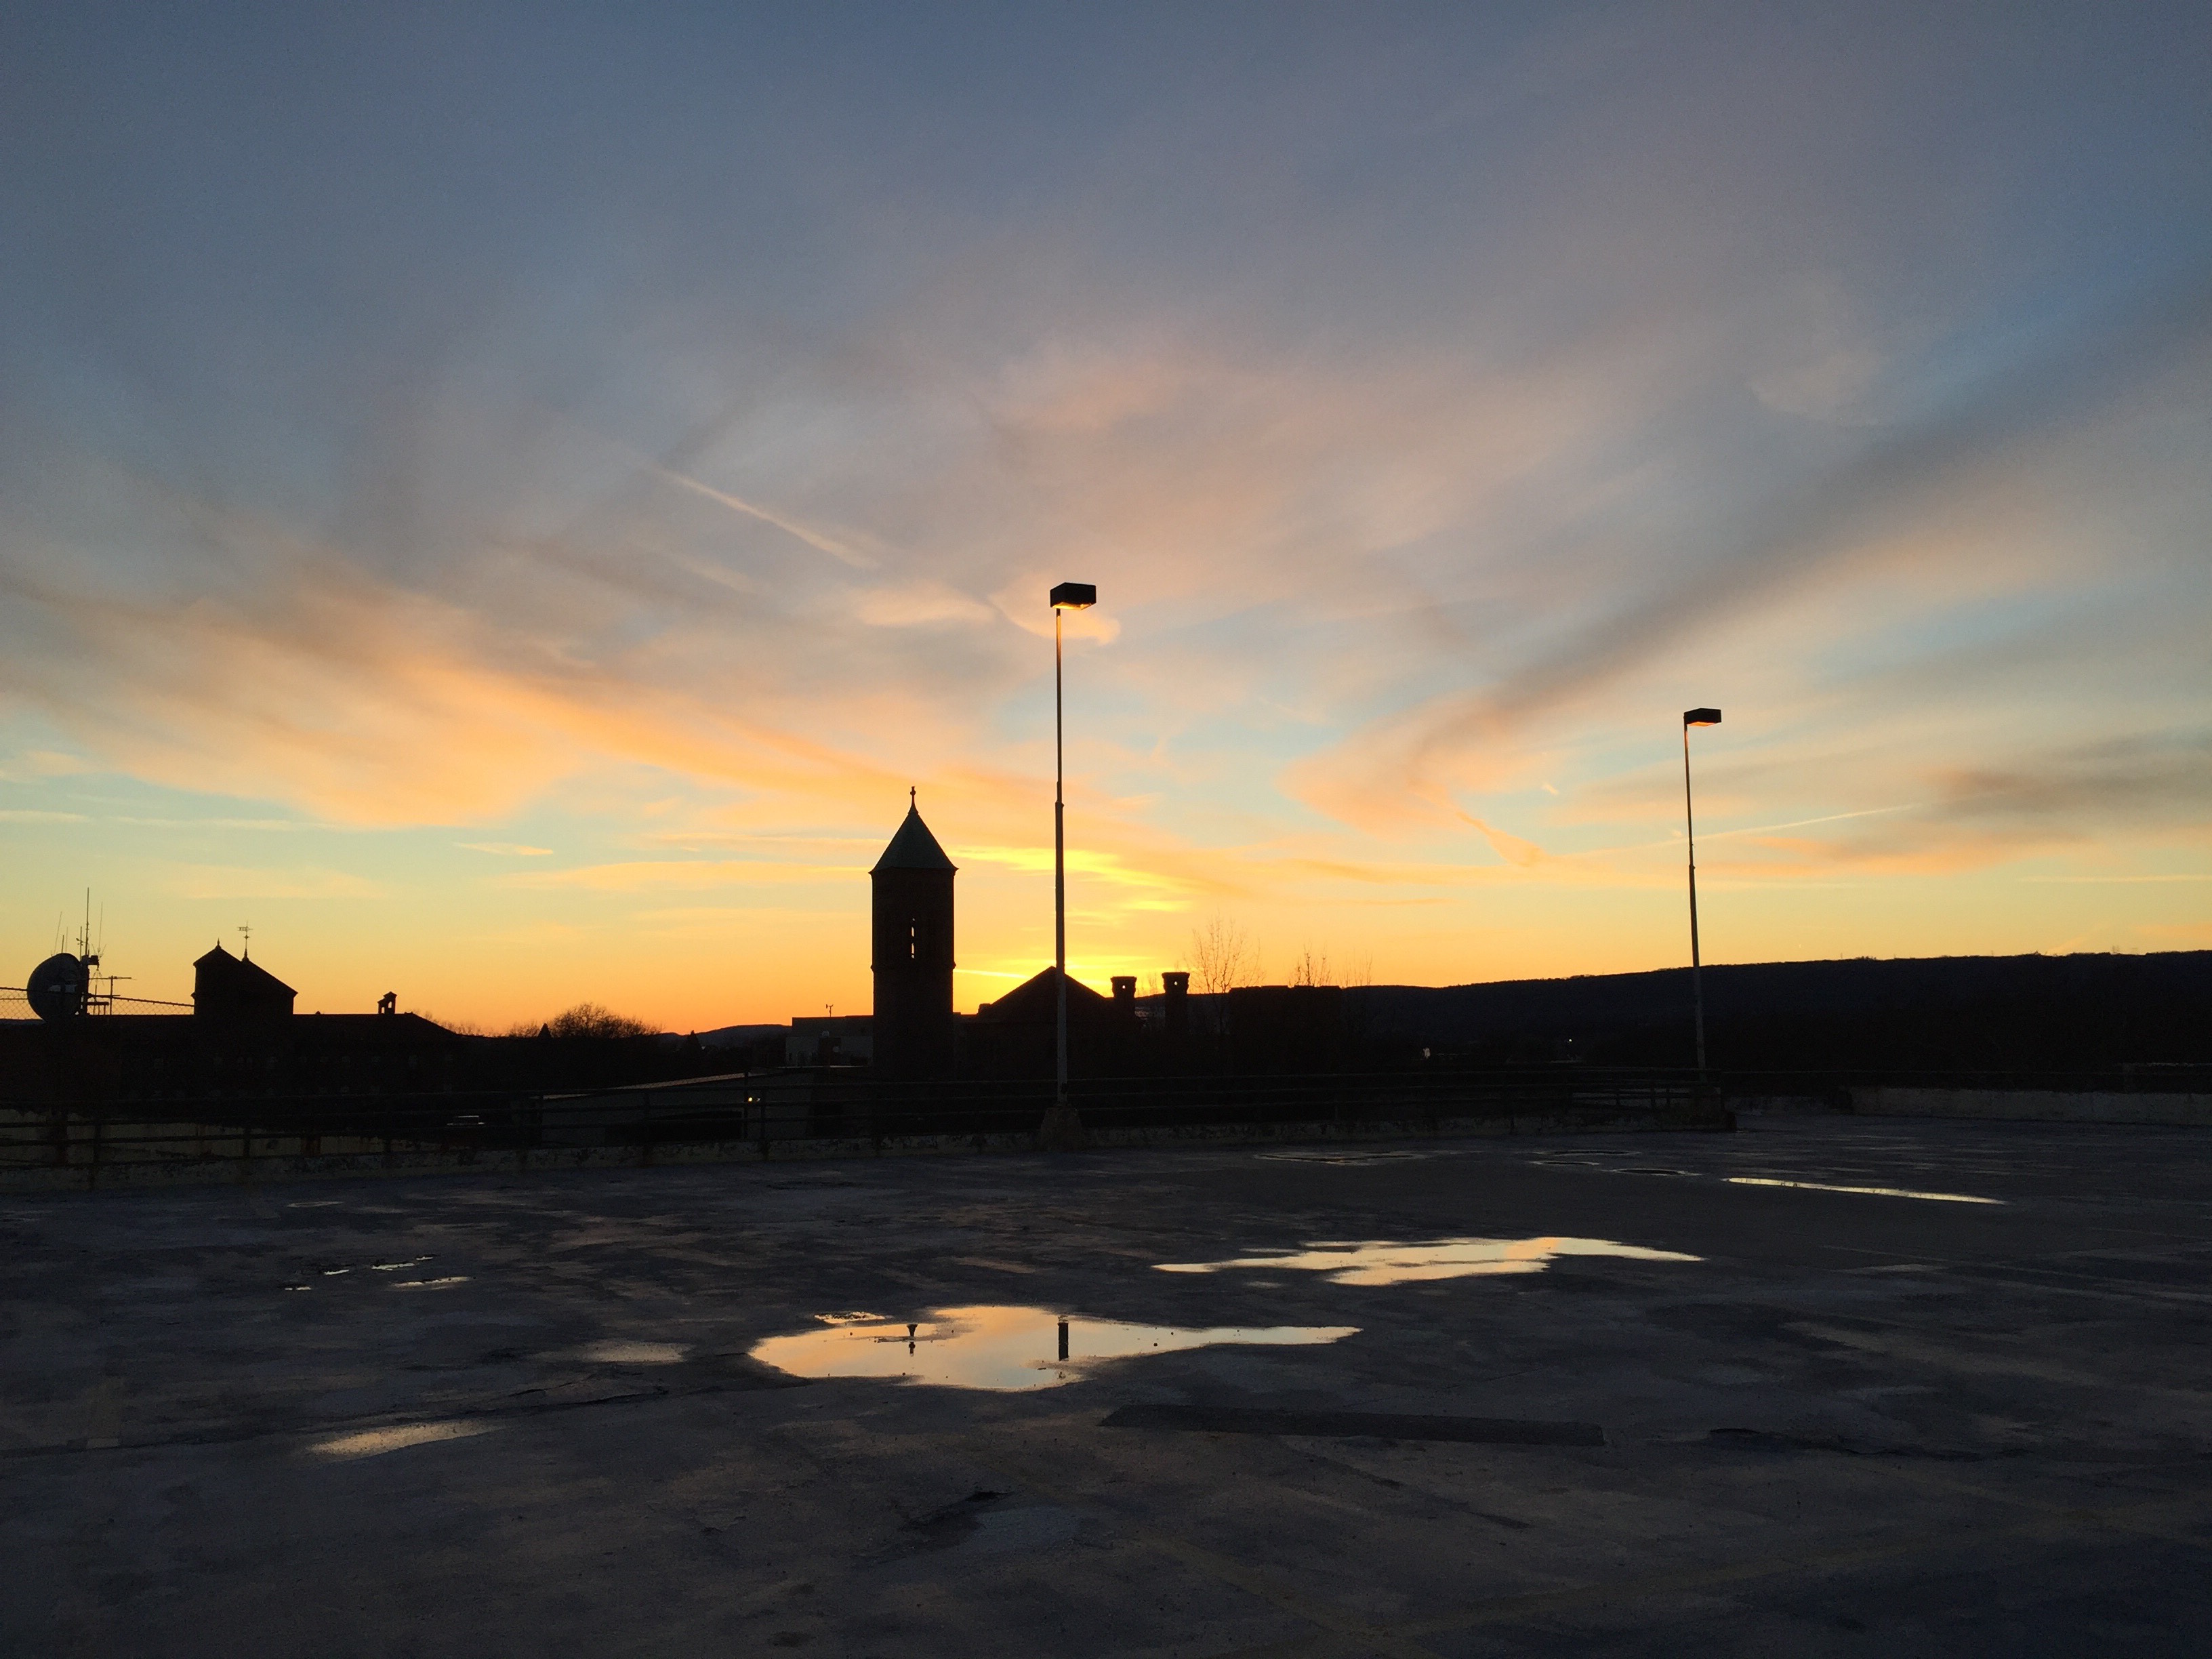 Sunset View from Boscov's Photo by Emily Letoski (February 26, 2016)